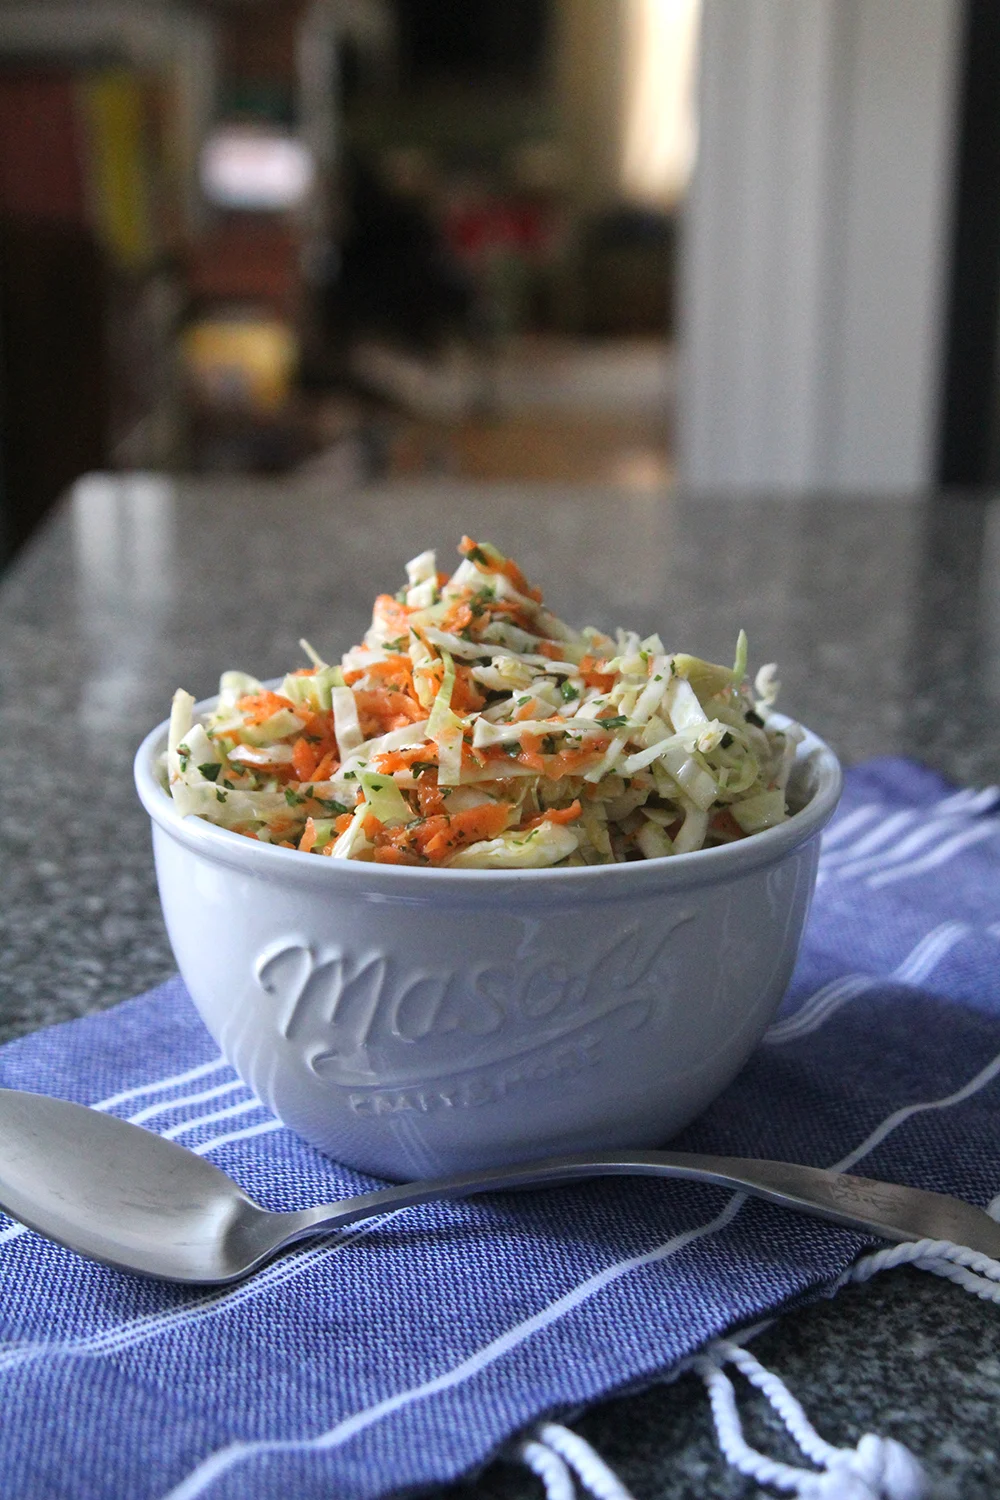 Oil and Vinegar Coleslaw is shown in a white bowl on a blue and white cloth on a granite countertop with a silver spoon nearby.